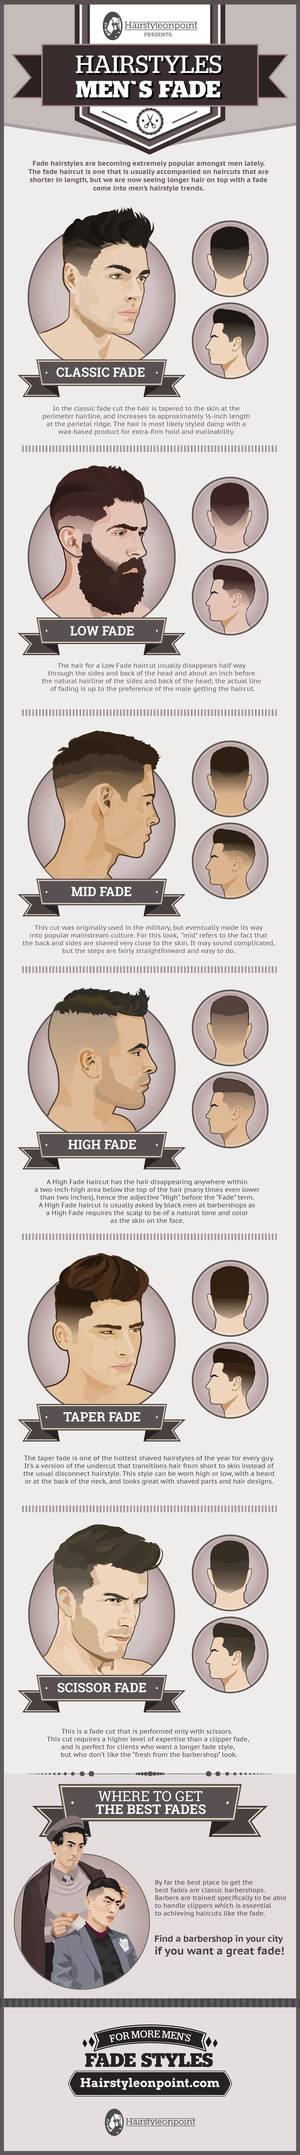 Fuck Boy Haircut - Men's Hairstyles: A Simple Guide To Popular And Modern Fades